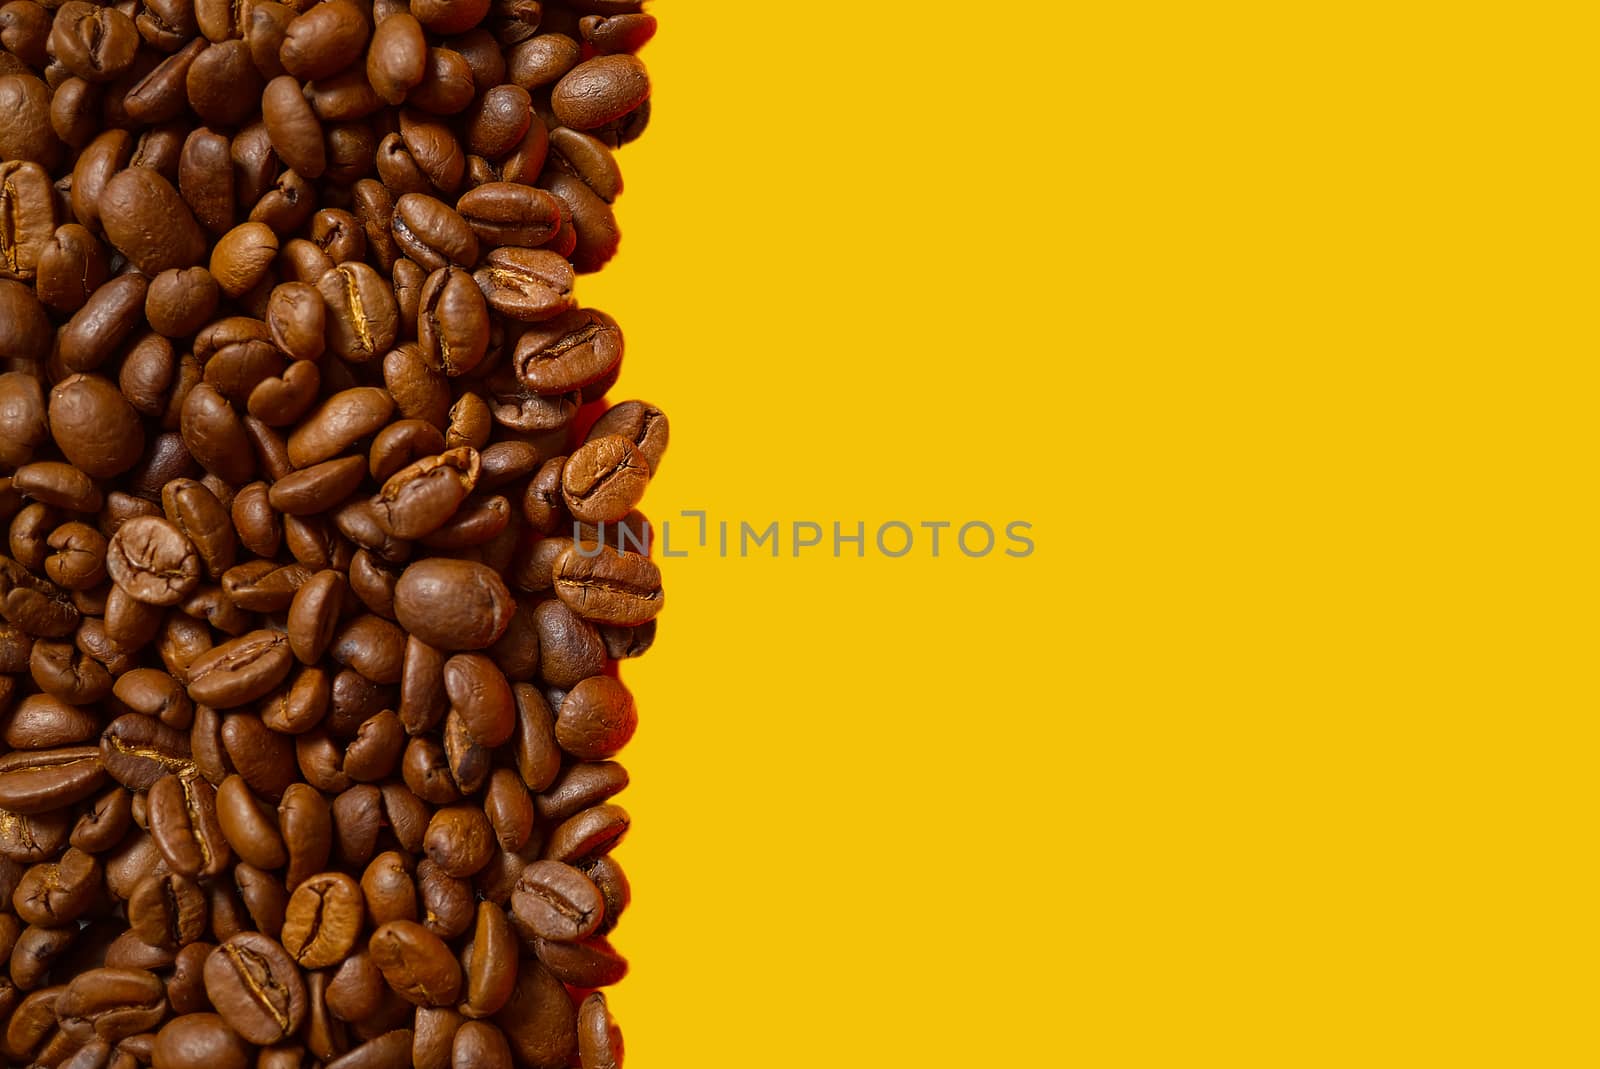 Texture of coffee beans. Roasted coffee beans background. close up Coffee beans with copy space on orange background.